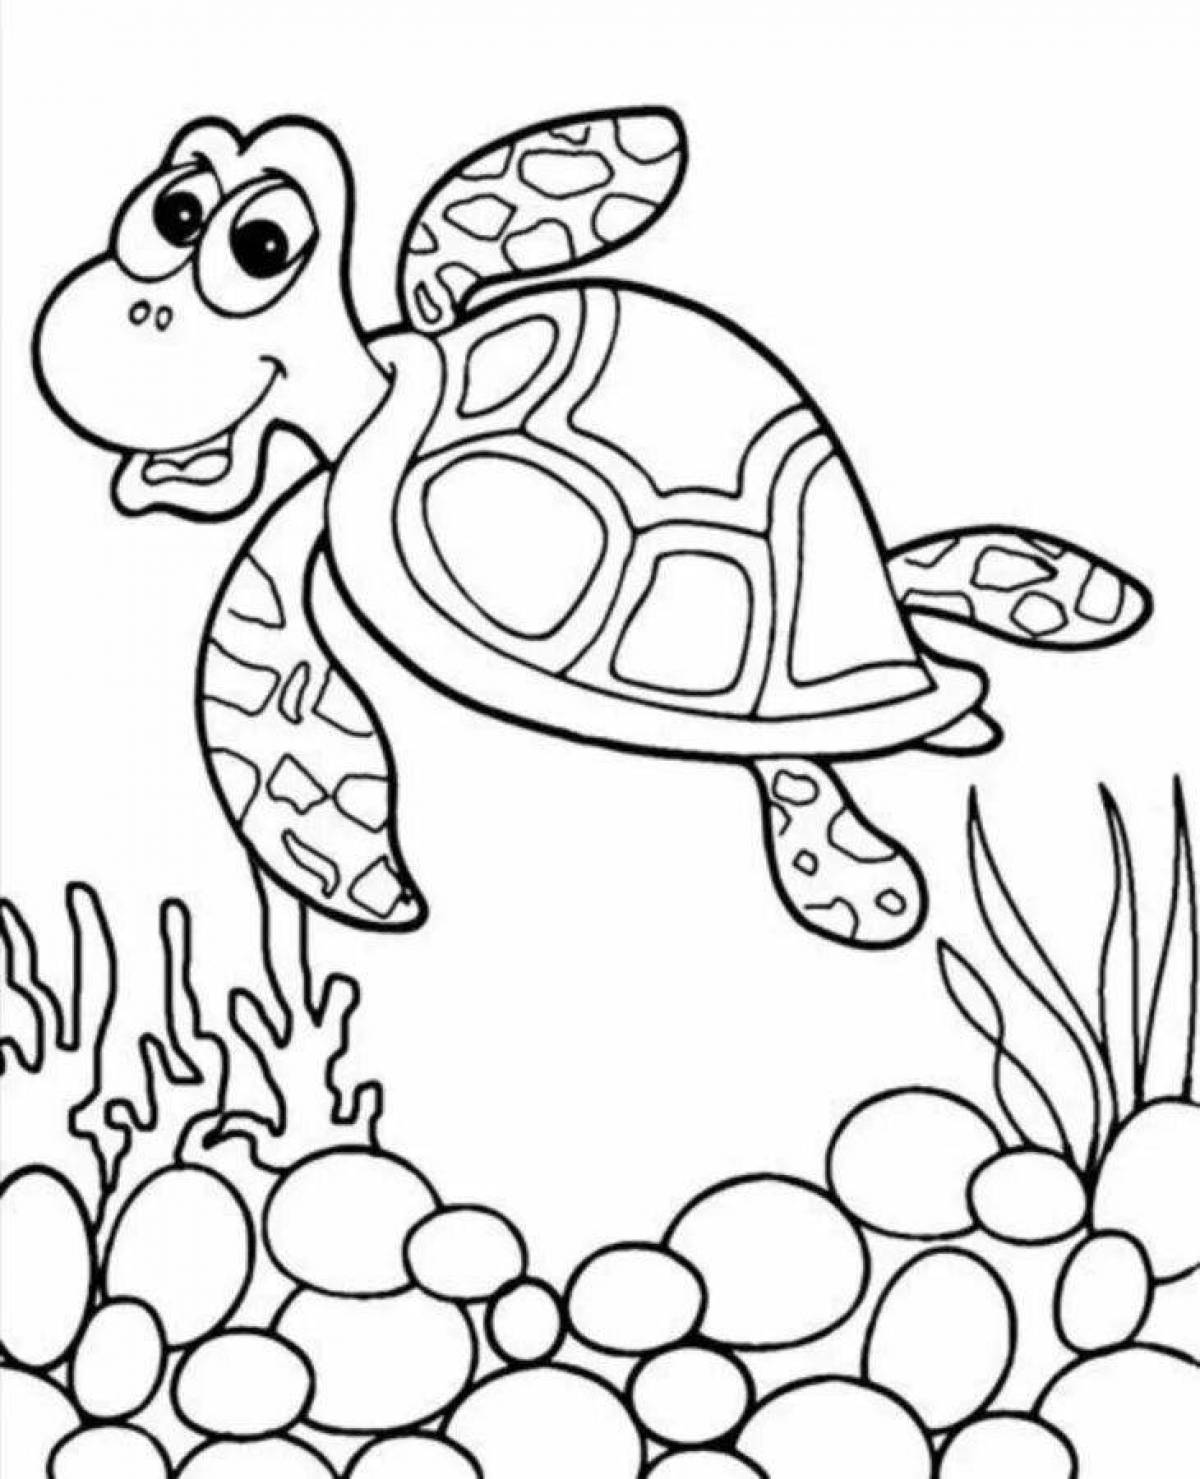 Coloured turtle coloring book for kids